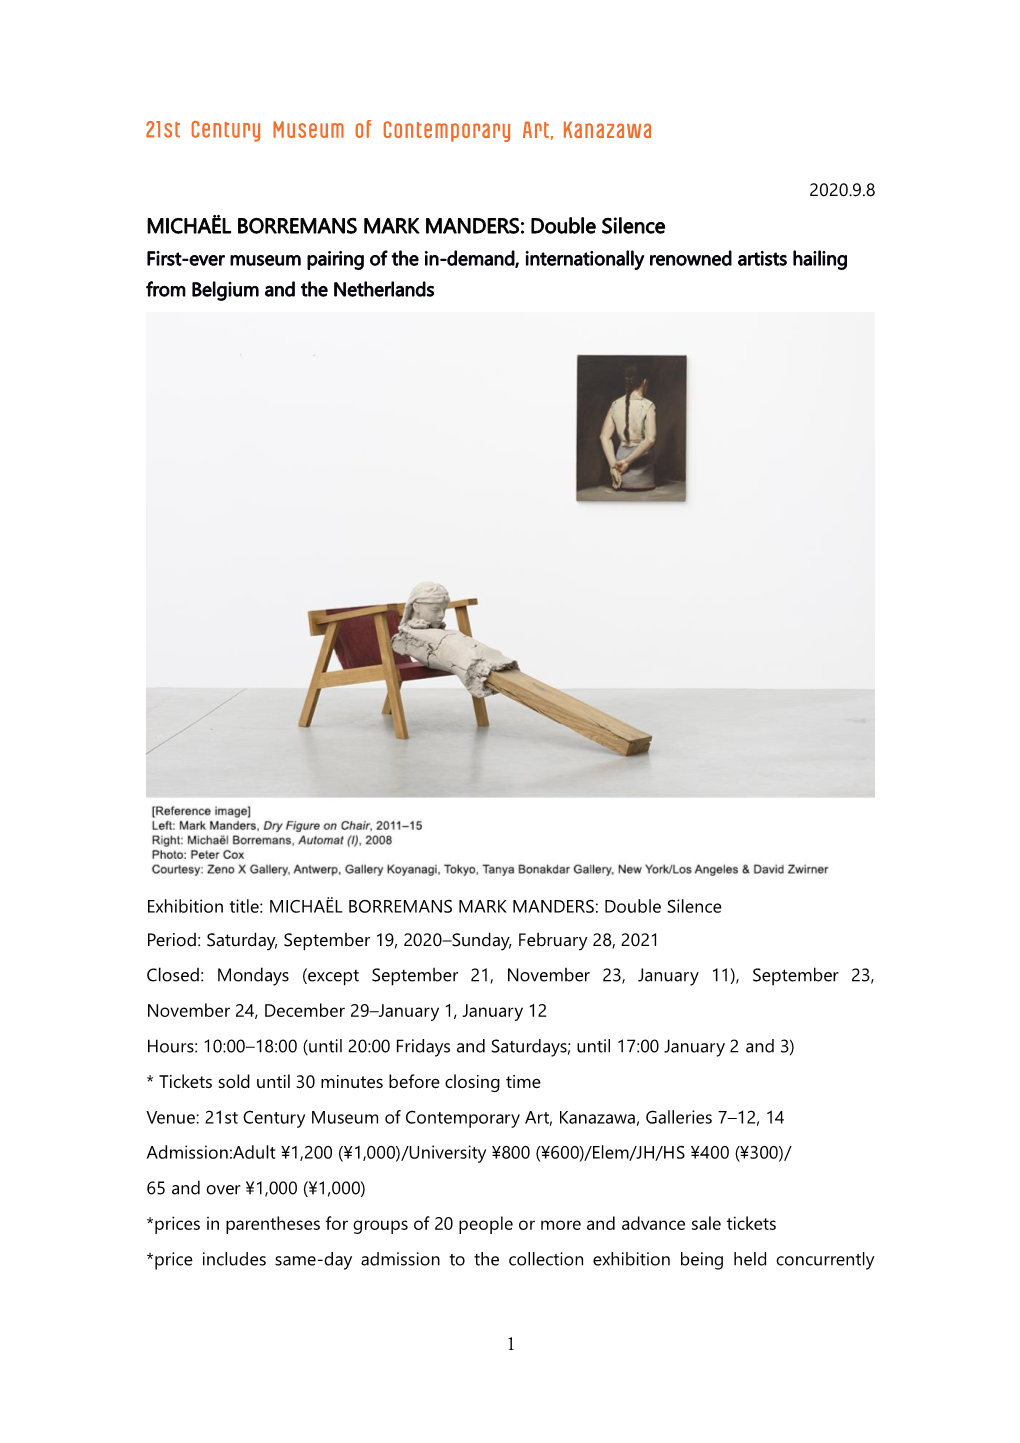 MICHAËL BORREMANS MARK MANDERS: Double Silence First-Ever Museum Pairing of the In-Demand, Internationally Renowned Artists Hailing from Belgium and the Netherlands